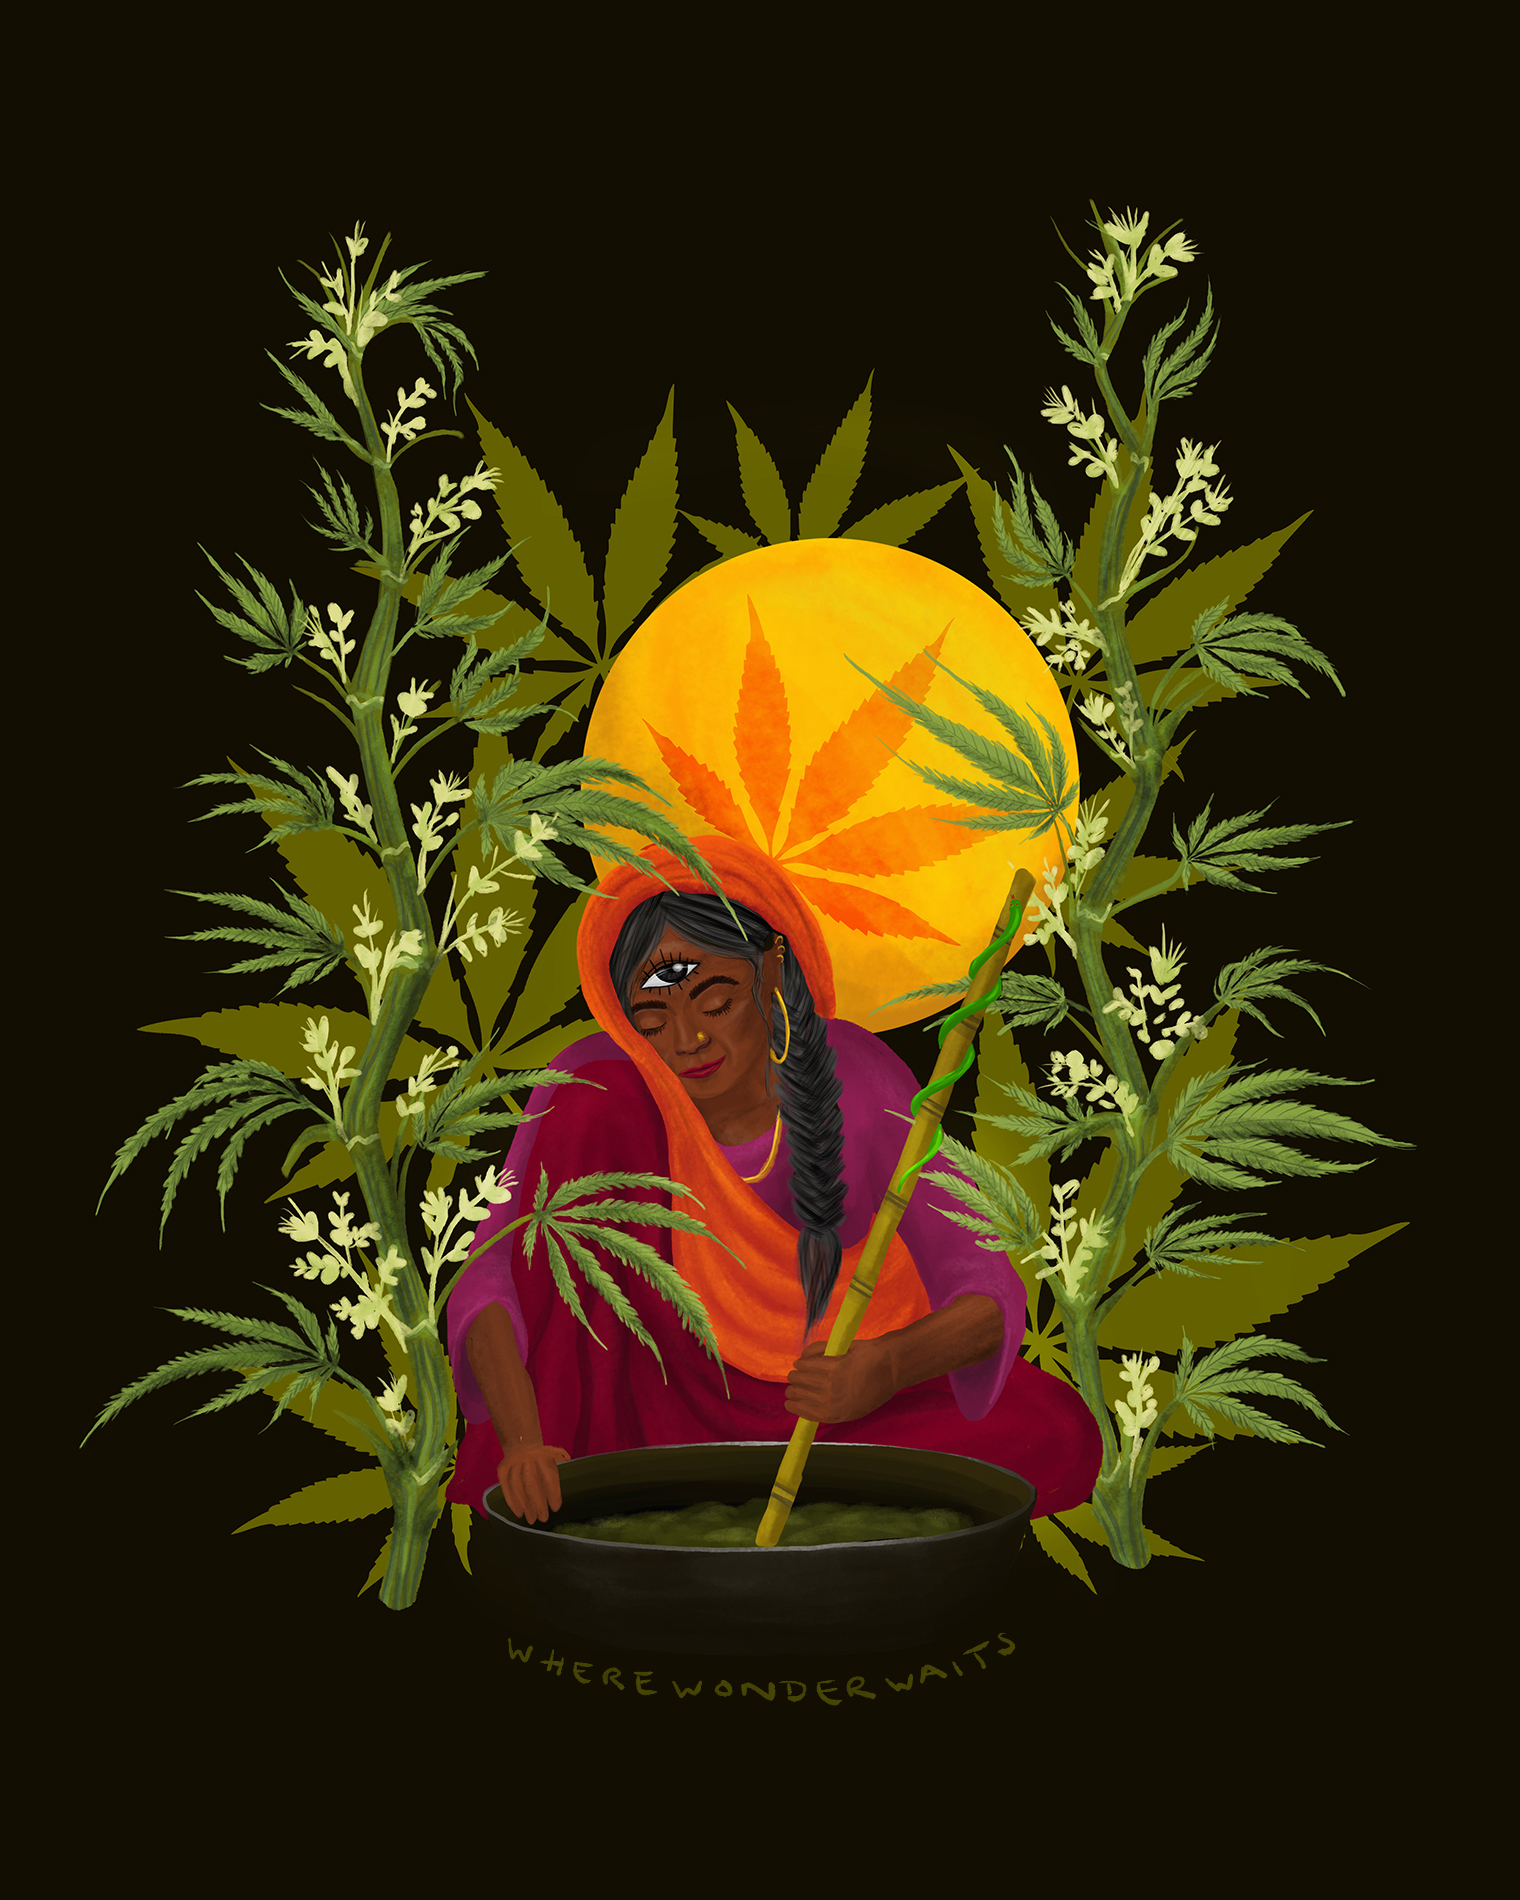 An illustration showing the typical preparation of the Indian drink Bhang with cannabis plants in the background.